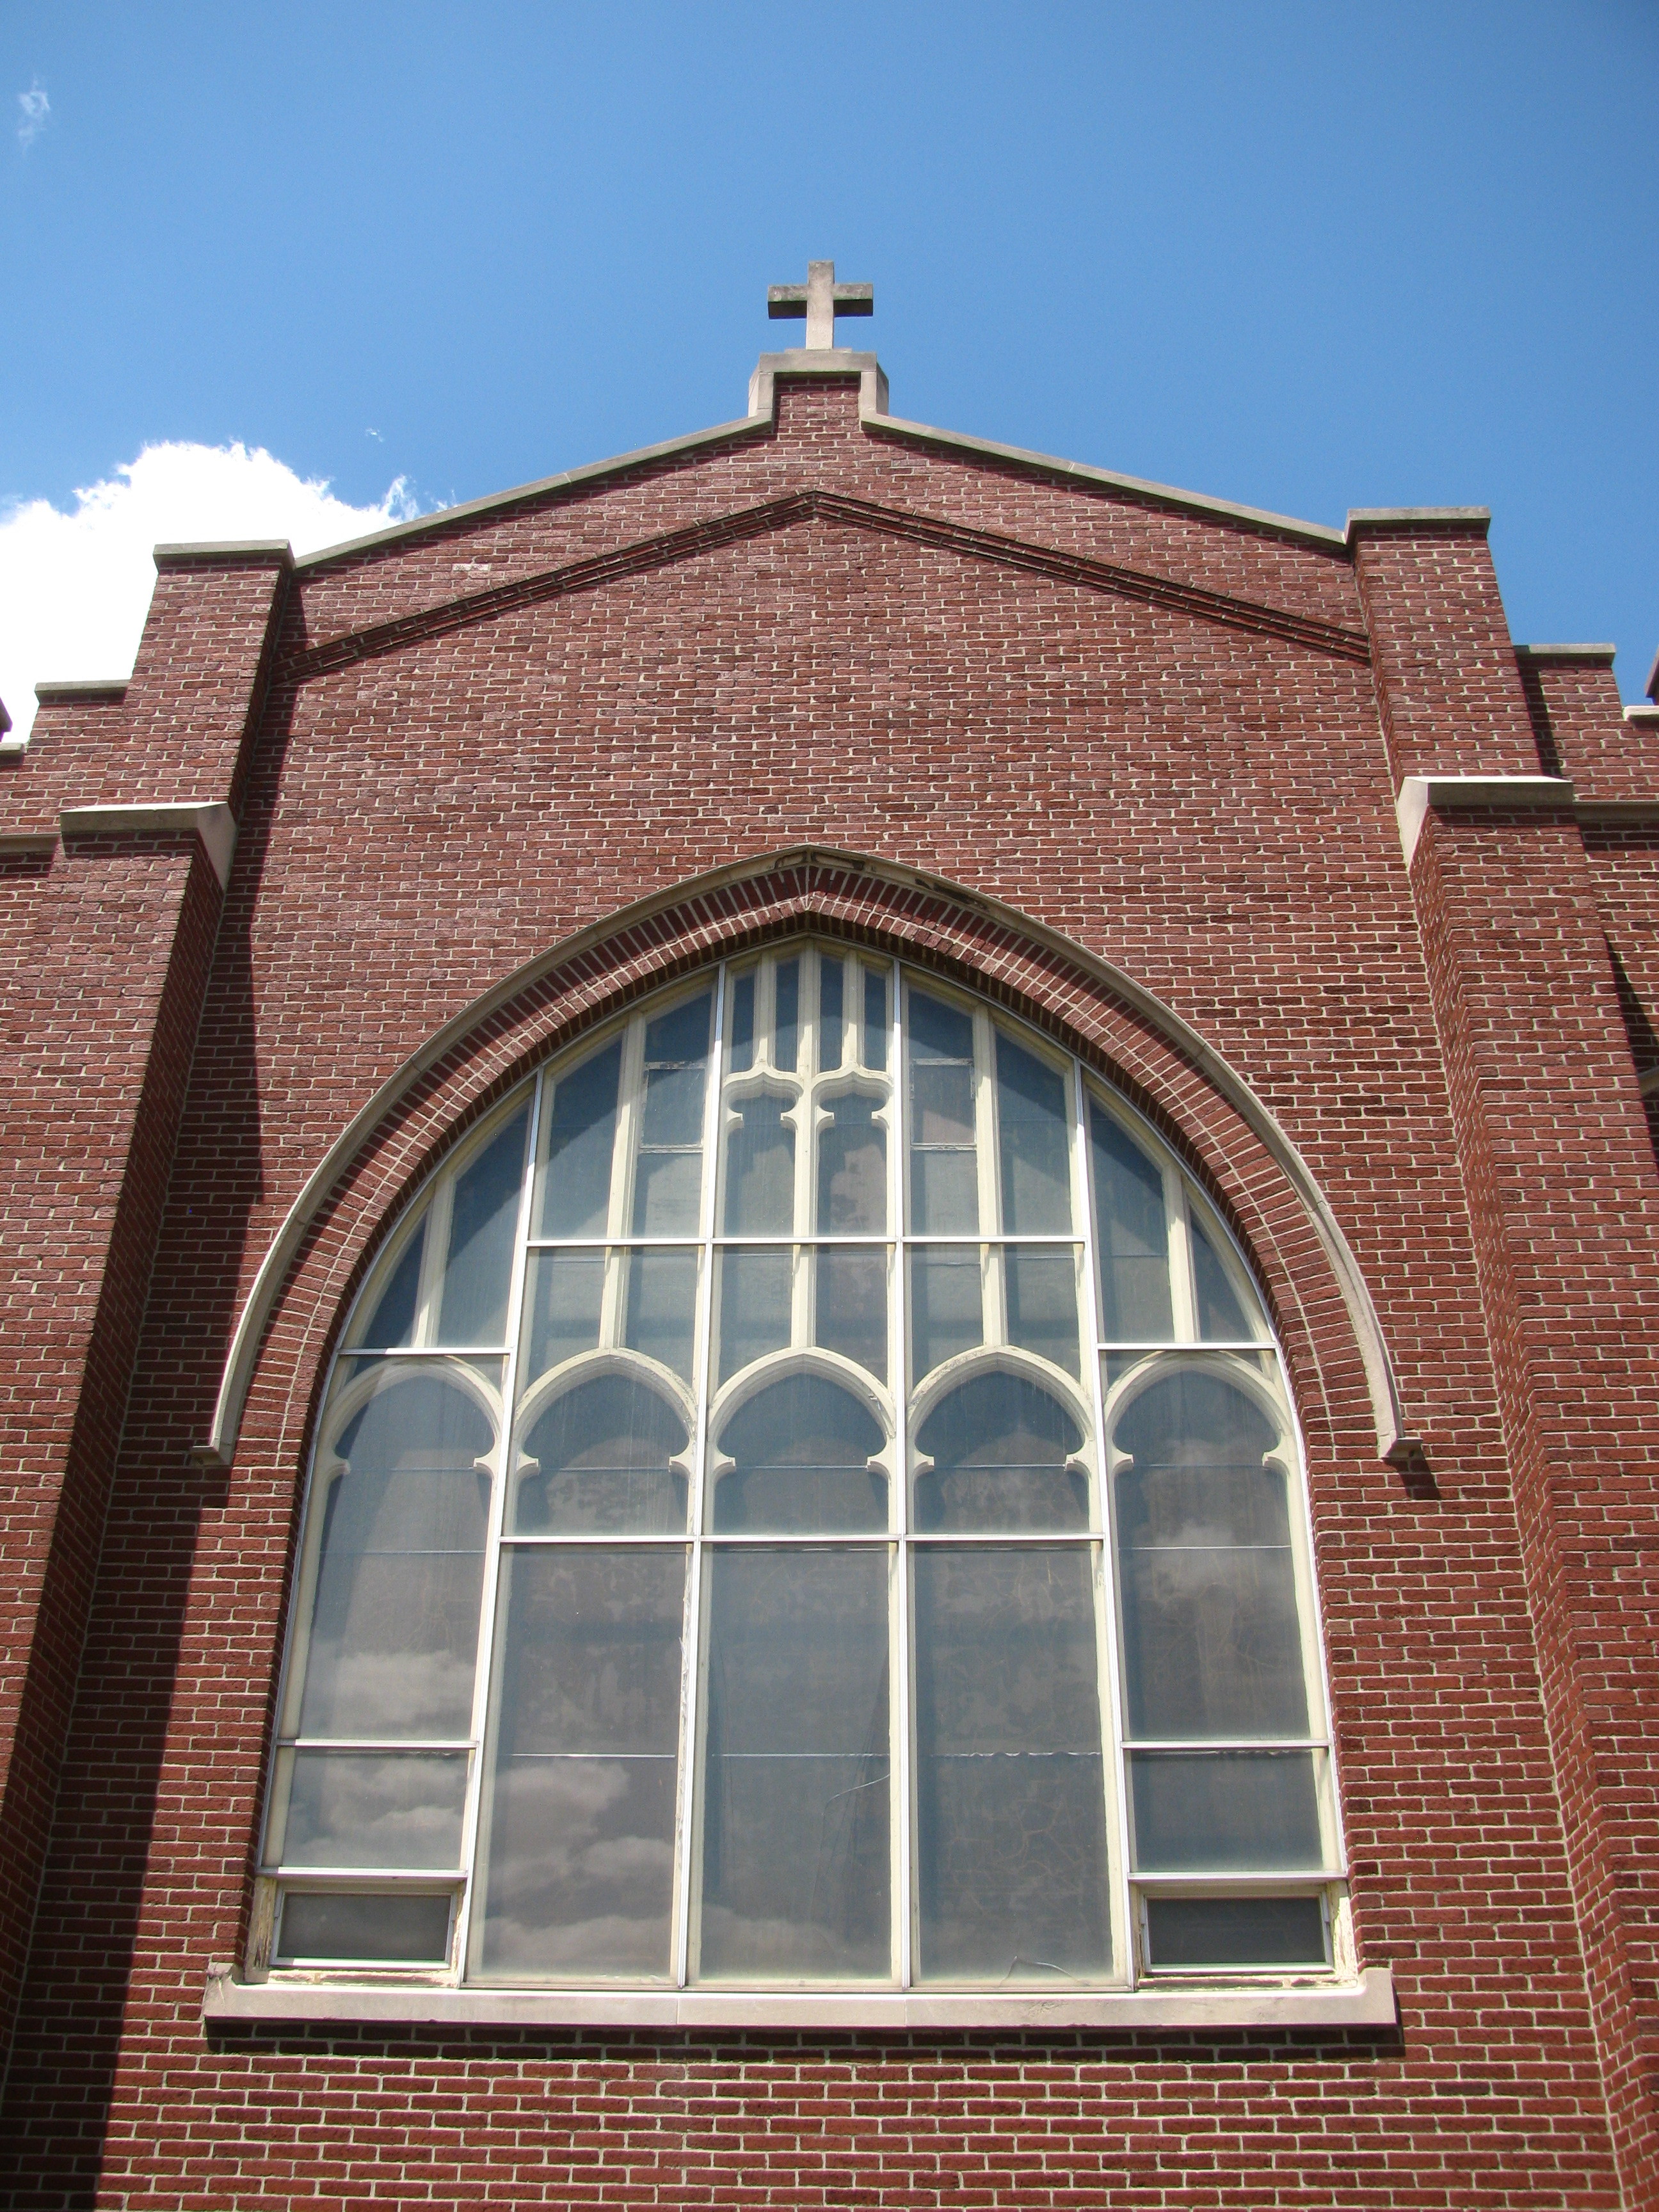 St Paul Evangelical Lutheran Church and School